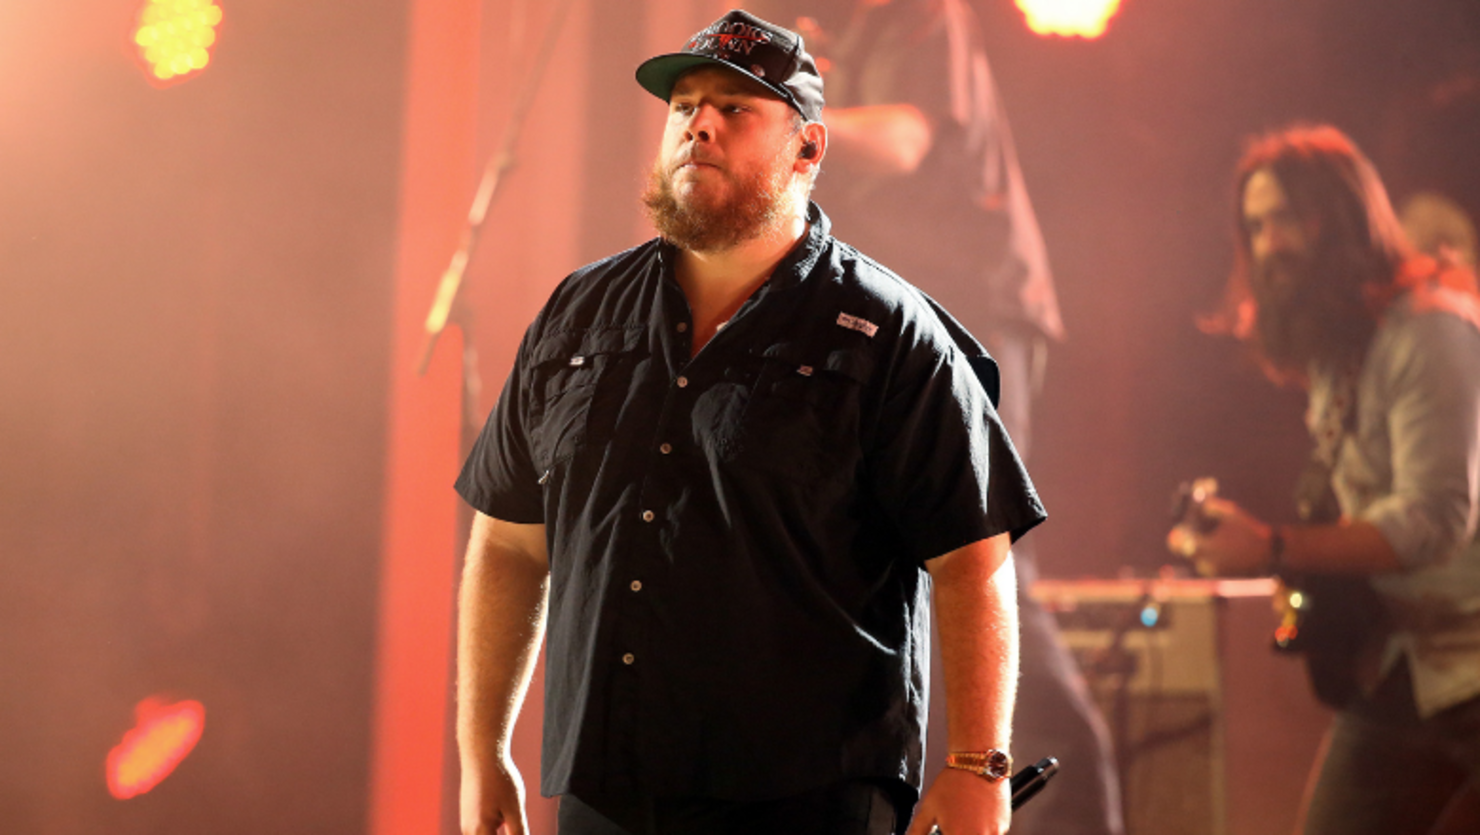 Luke Combs Rocks The Stage With 'Cold As You' Performance At The CMA Awards